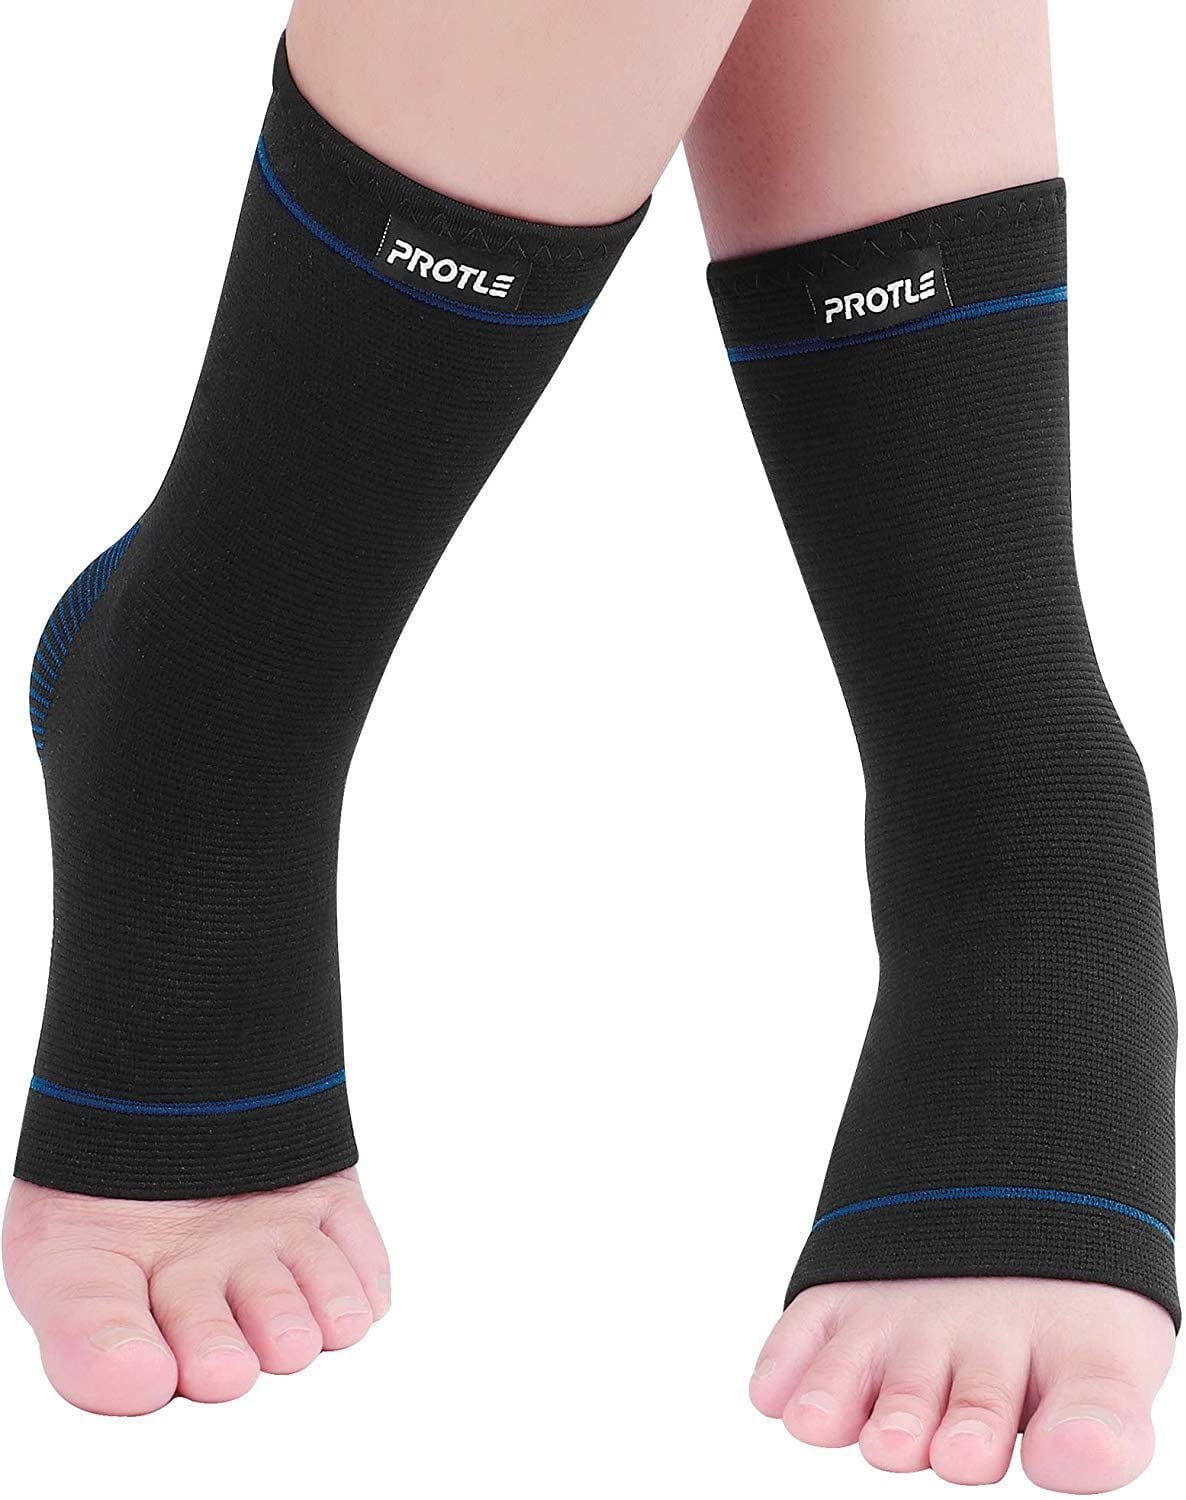 Increase Blood Circulation Relieve Arch Pain 1 Pair 20-30 mmHg Foot Compression Sleeves for Ankle/Heel Support HipStone Plantar Fasciitis Compression Socks Reduce Foot Swelling